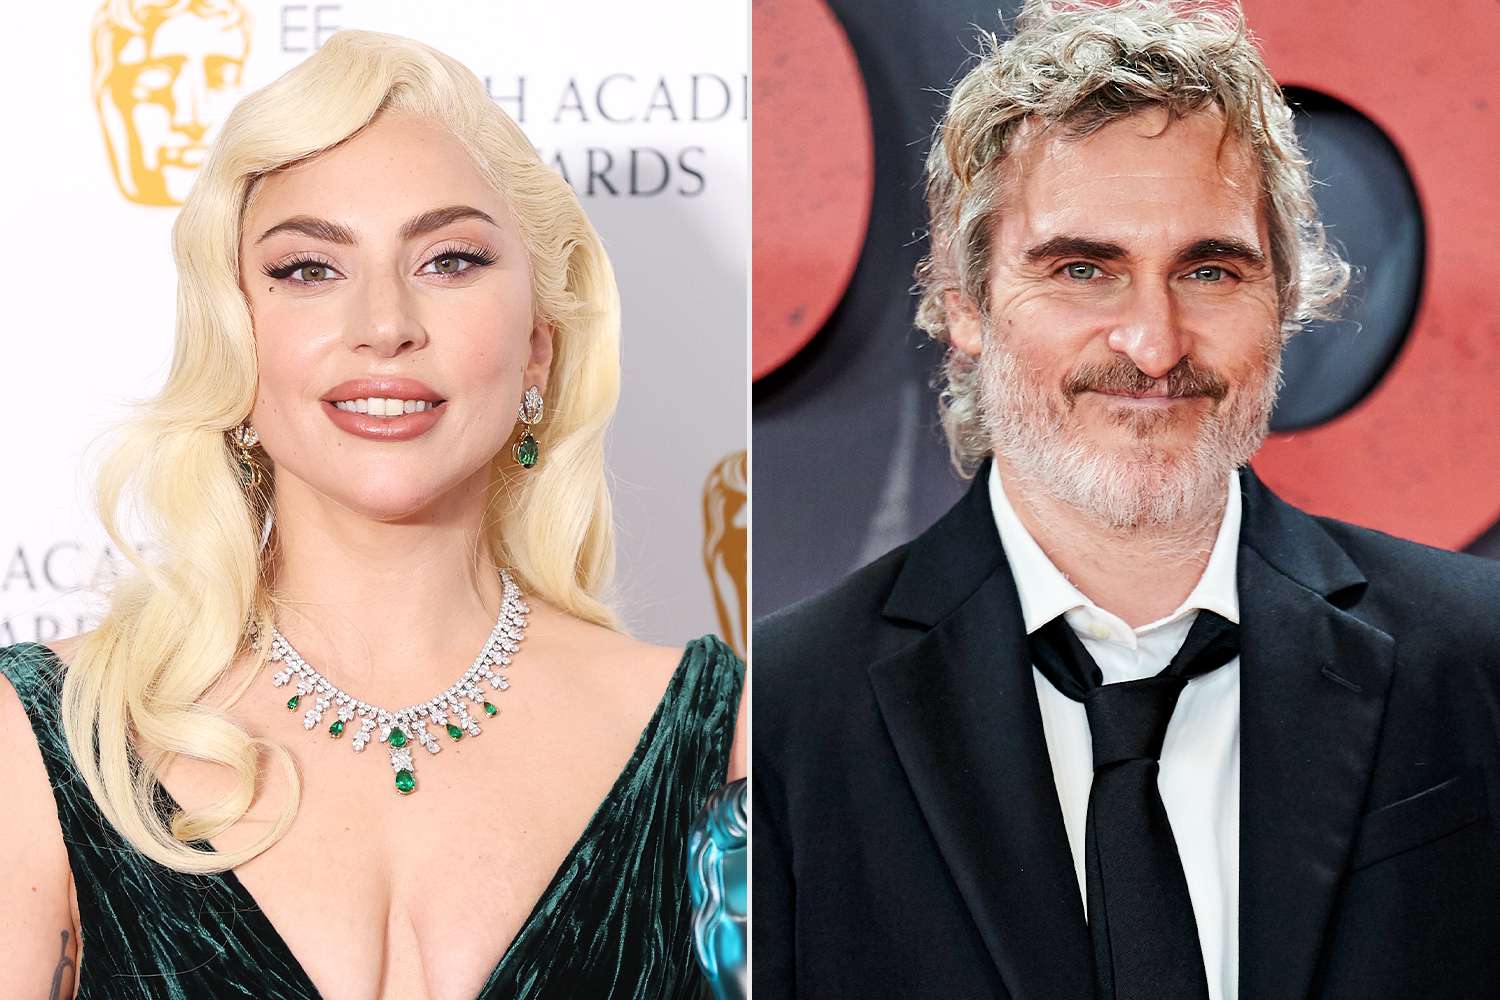 Joaquin Phoenix Says Lady Gaga 'Spit Up' Coffee When She Heard Him Sing: 'Made Me Feel Confident'